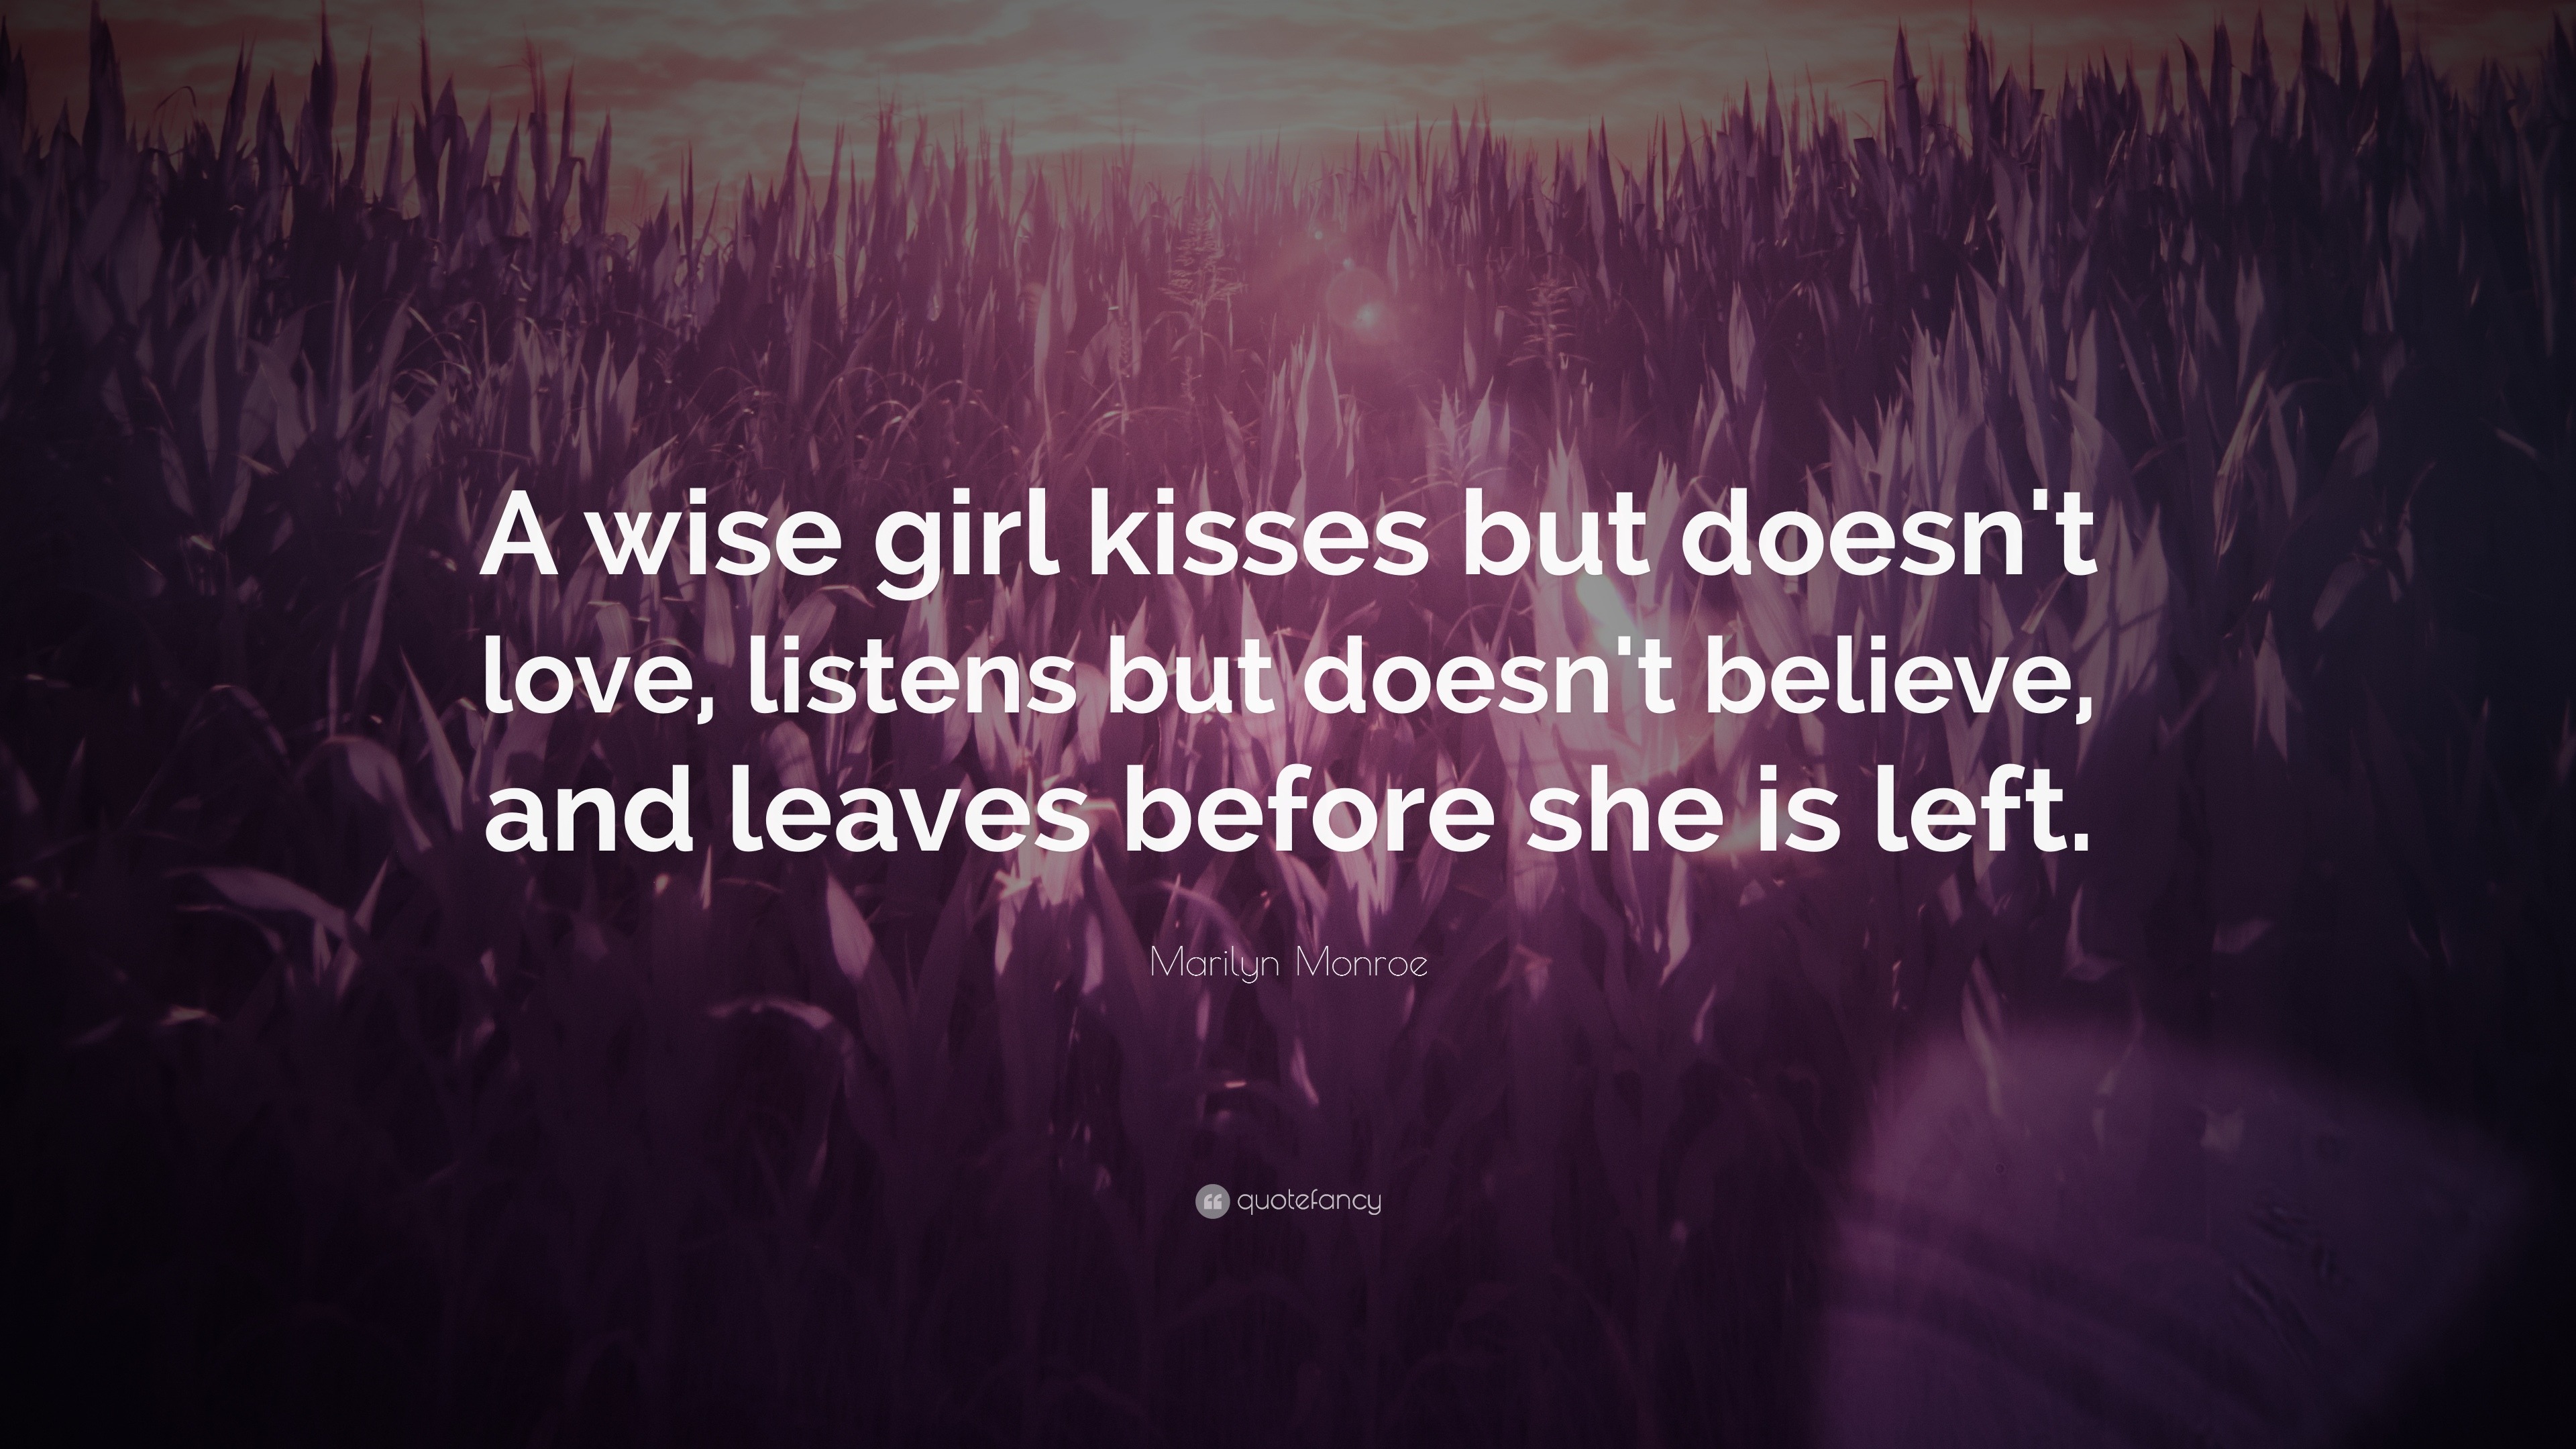 She doesn t love. Family Wise quotes. Family Wise quotes альбомная ориентация. A Wise woman once said.